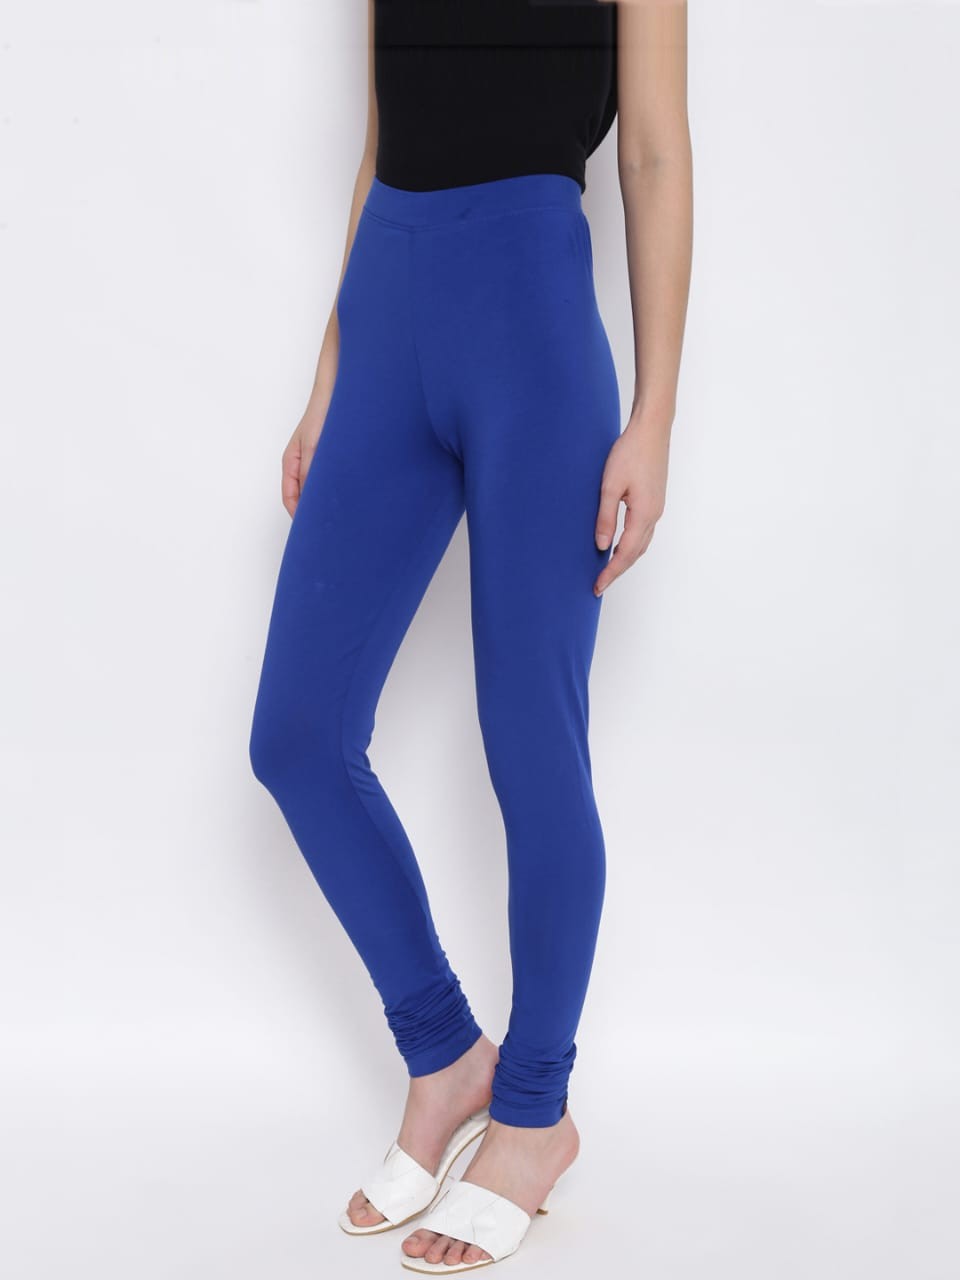 MM Style- Women's 4-Way Stretch Leggings for Every Occasion (Blue)